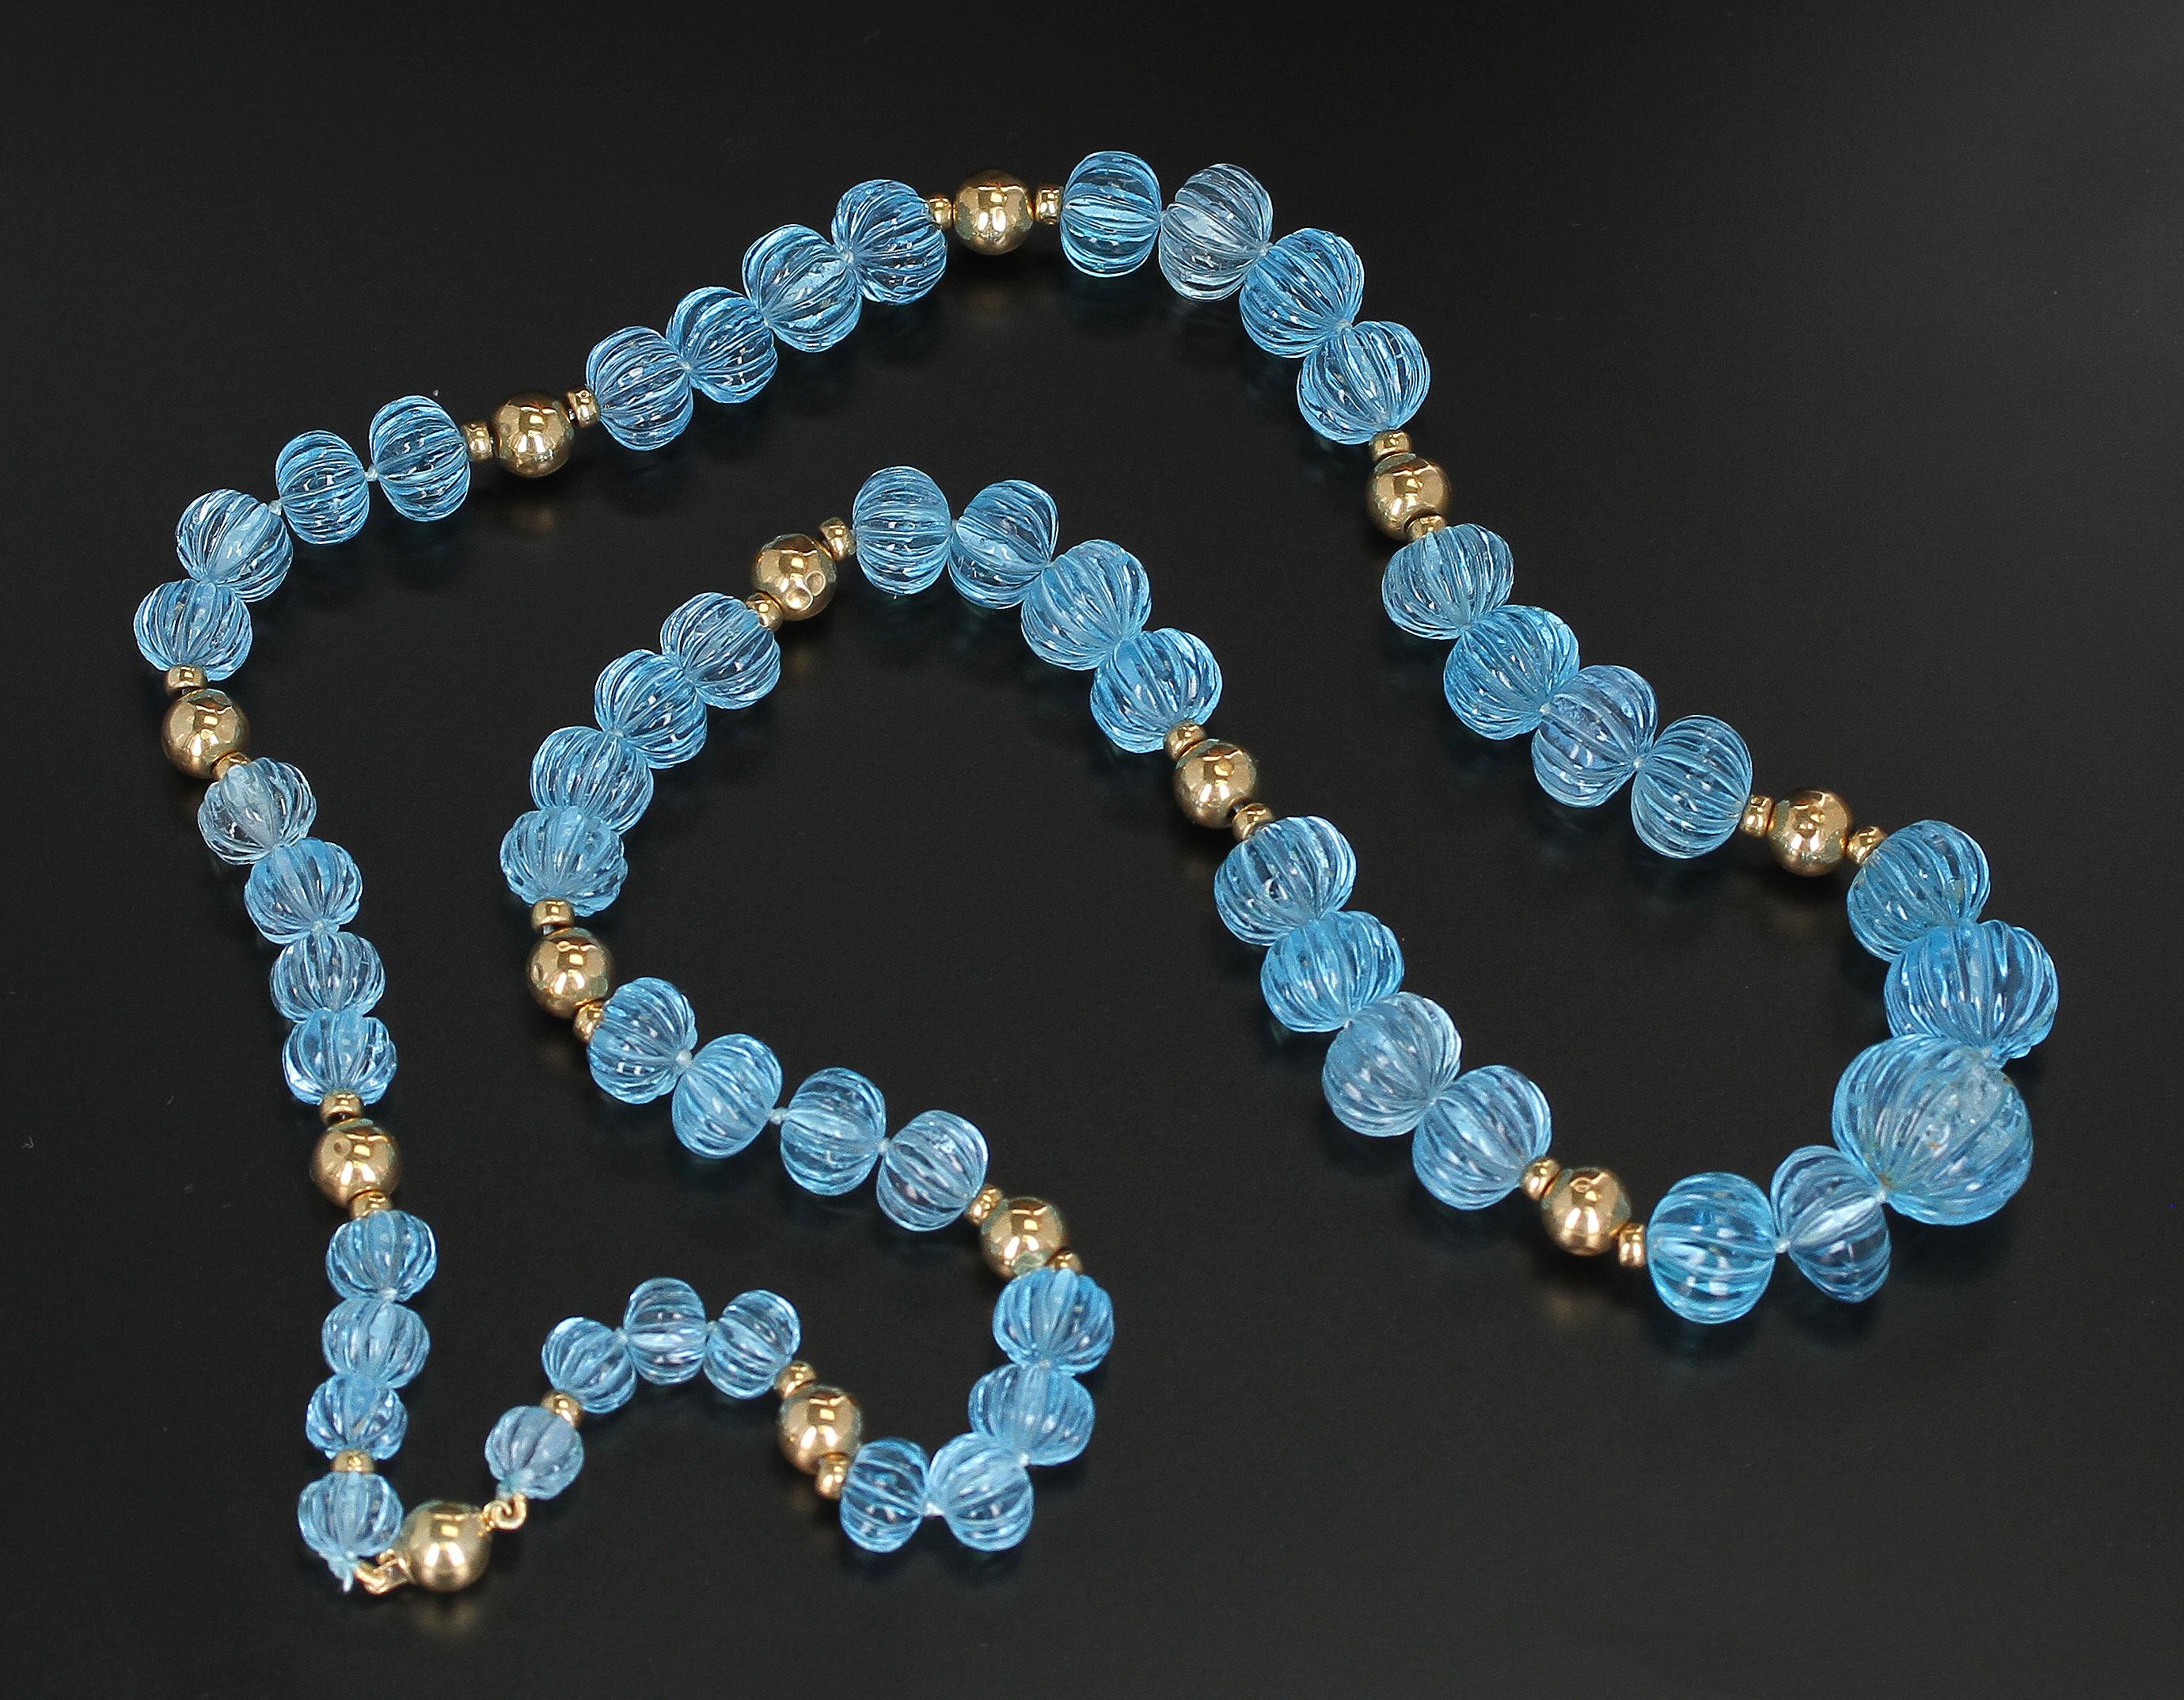 A stunning necklace consisting of Carved Blue Topaz ranging from 8MM to 18MM with 14K Gold Beads. GW: 595 cts. Length: 26.5